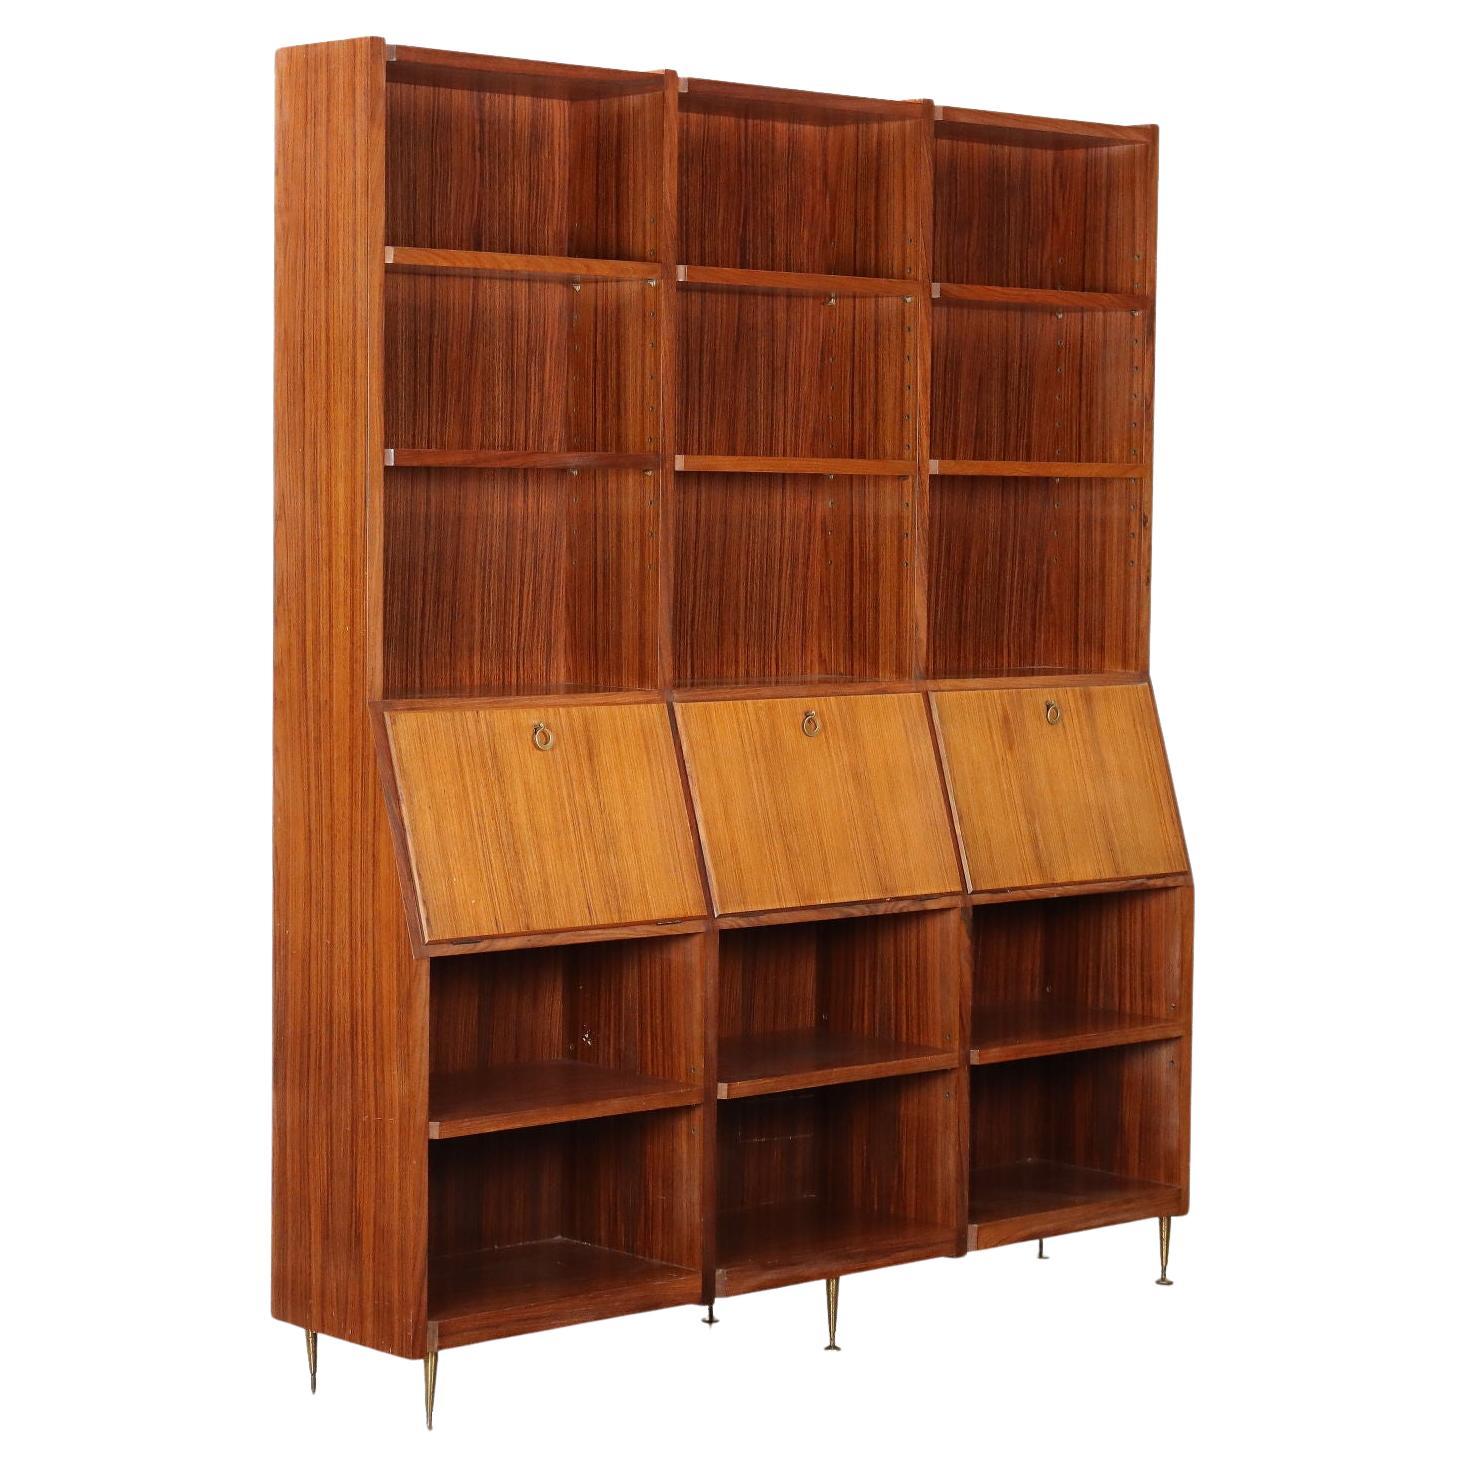 Vintage Bookshelf Exotic Wood Italy, 1960s For Sale